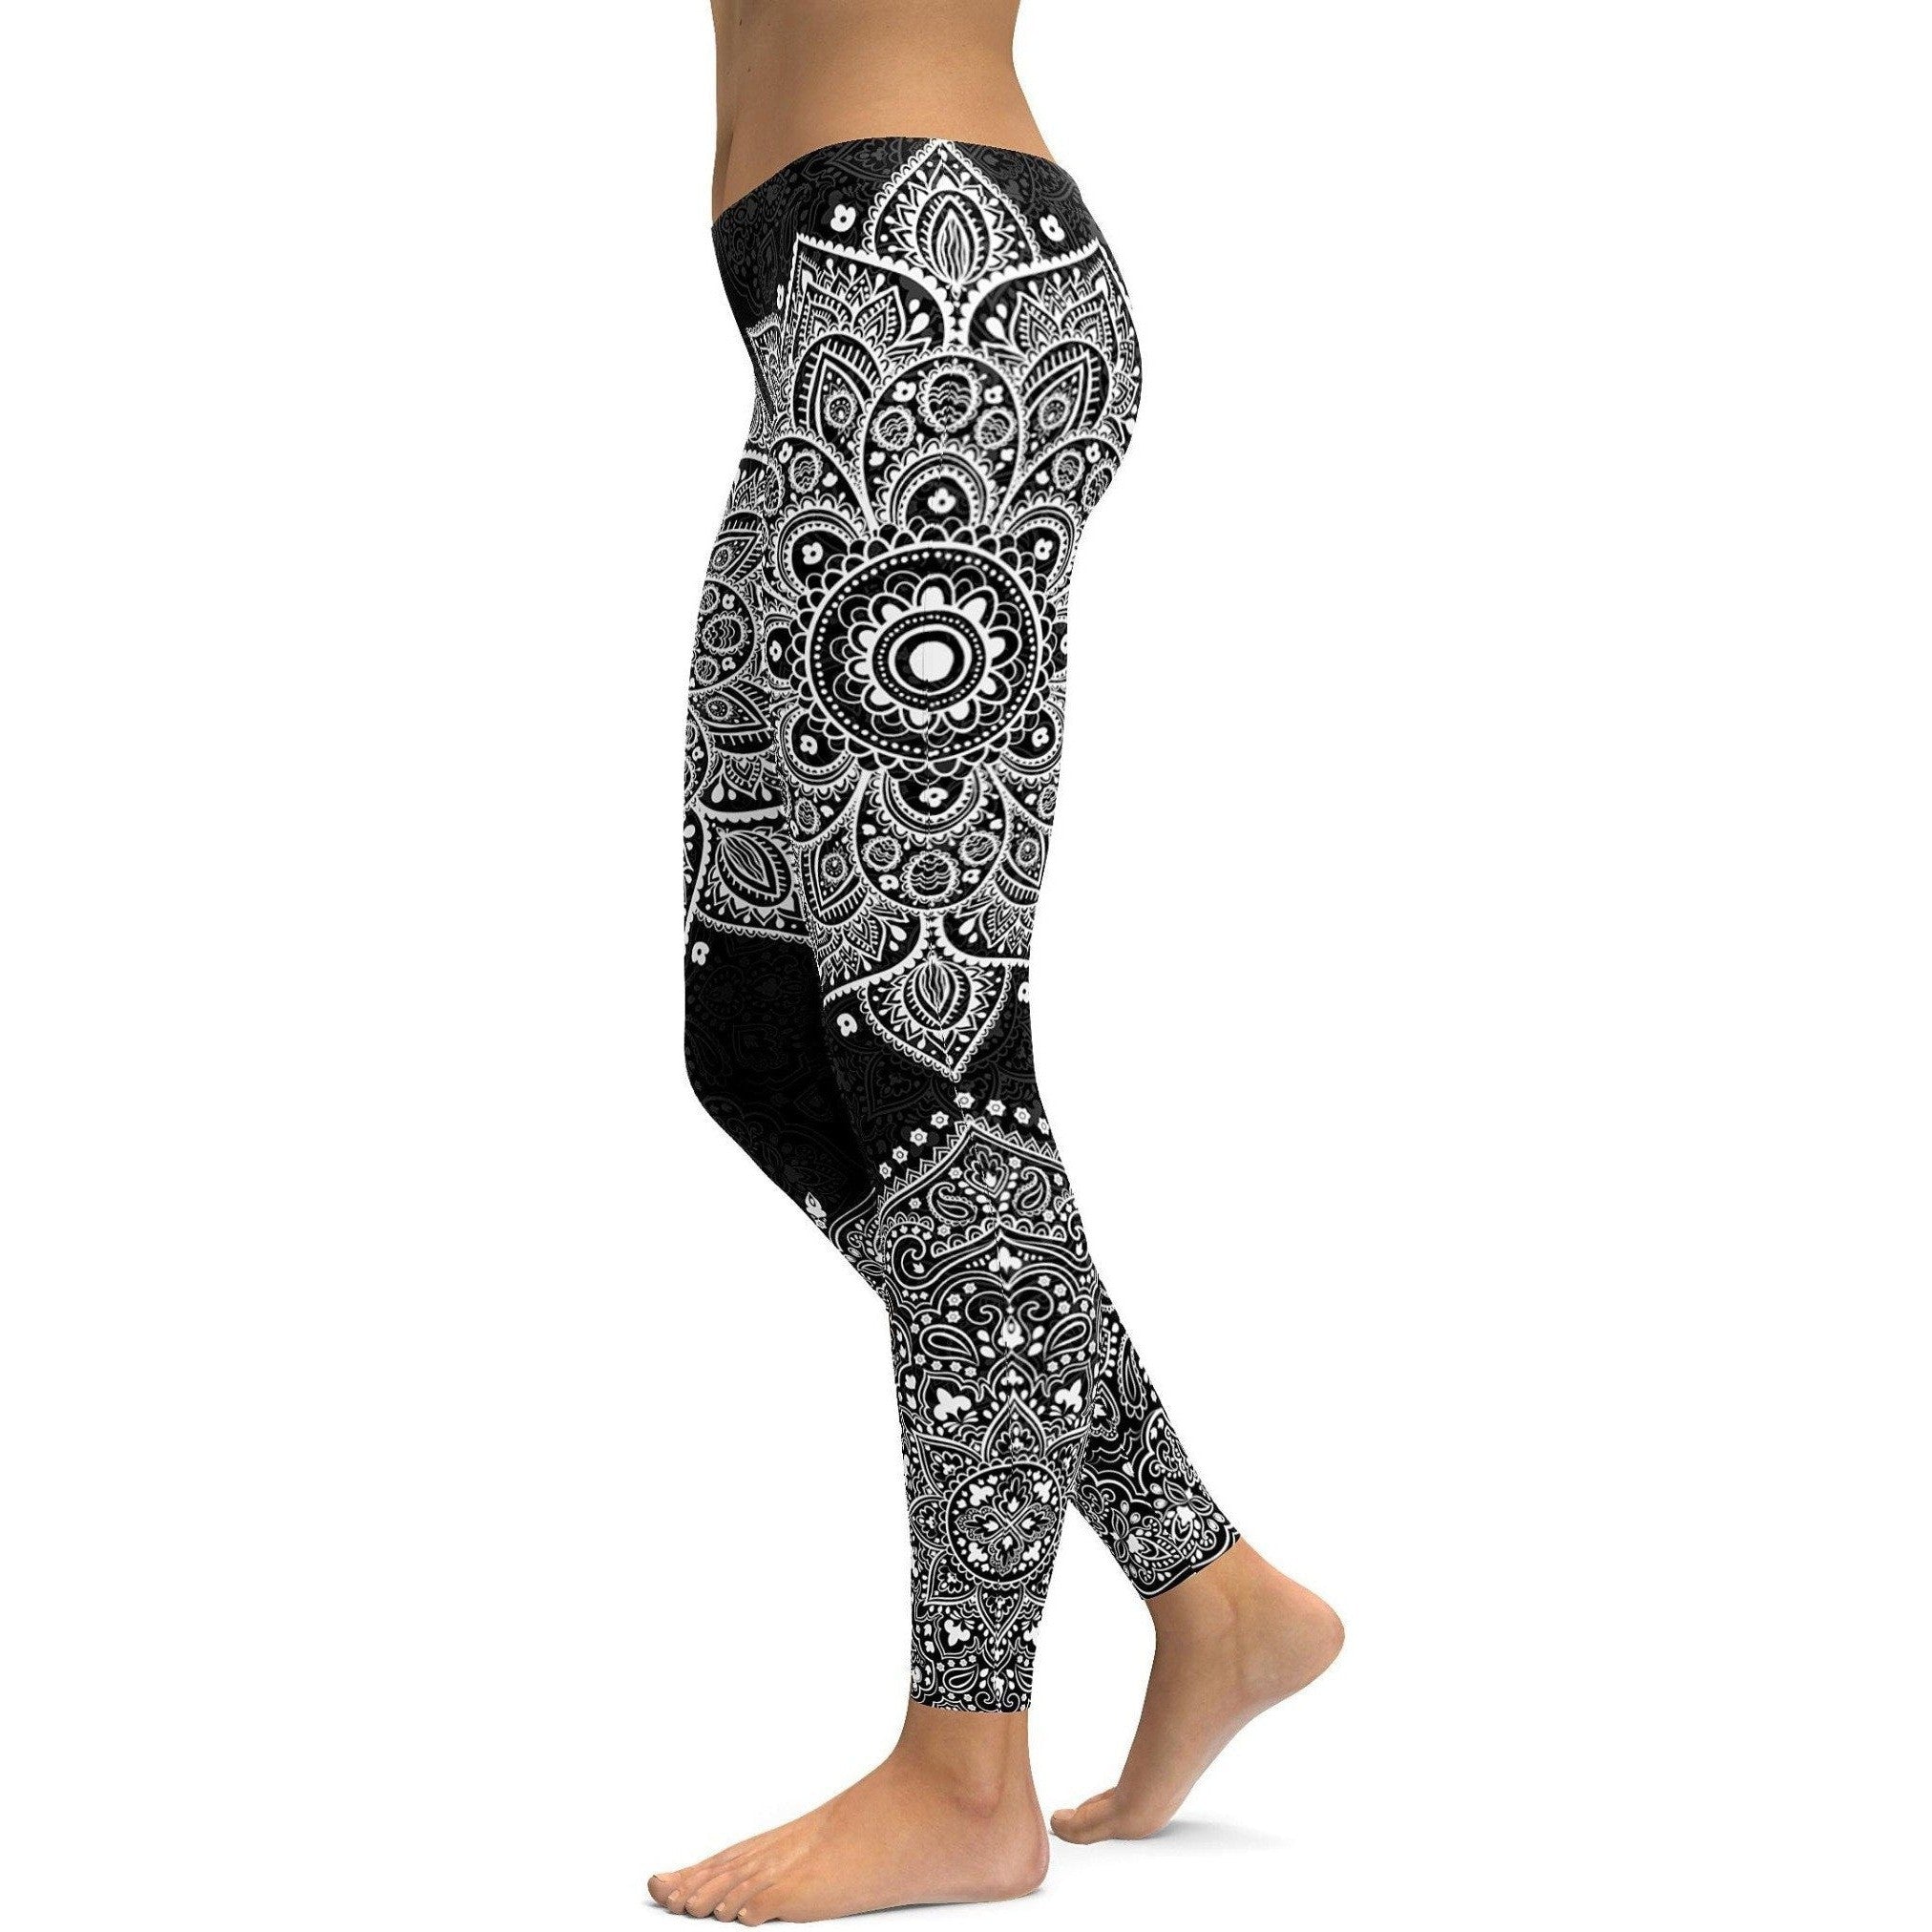 Buy we fleece Crossover Leggings for Women-Workout High Waisted Tummy  Control Non See Through Super Soft Black Legging Yoga Pants, Black,  Small-Medium at Amazon.in